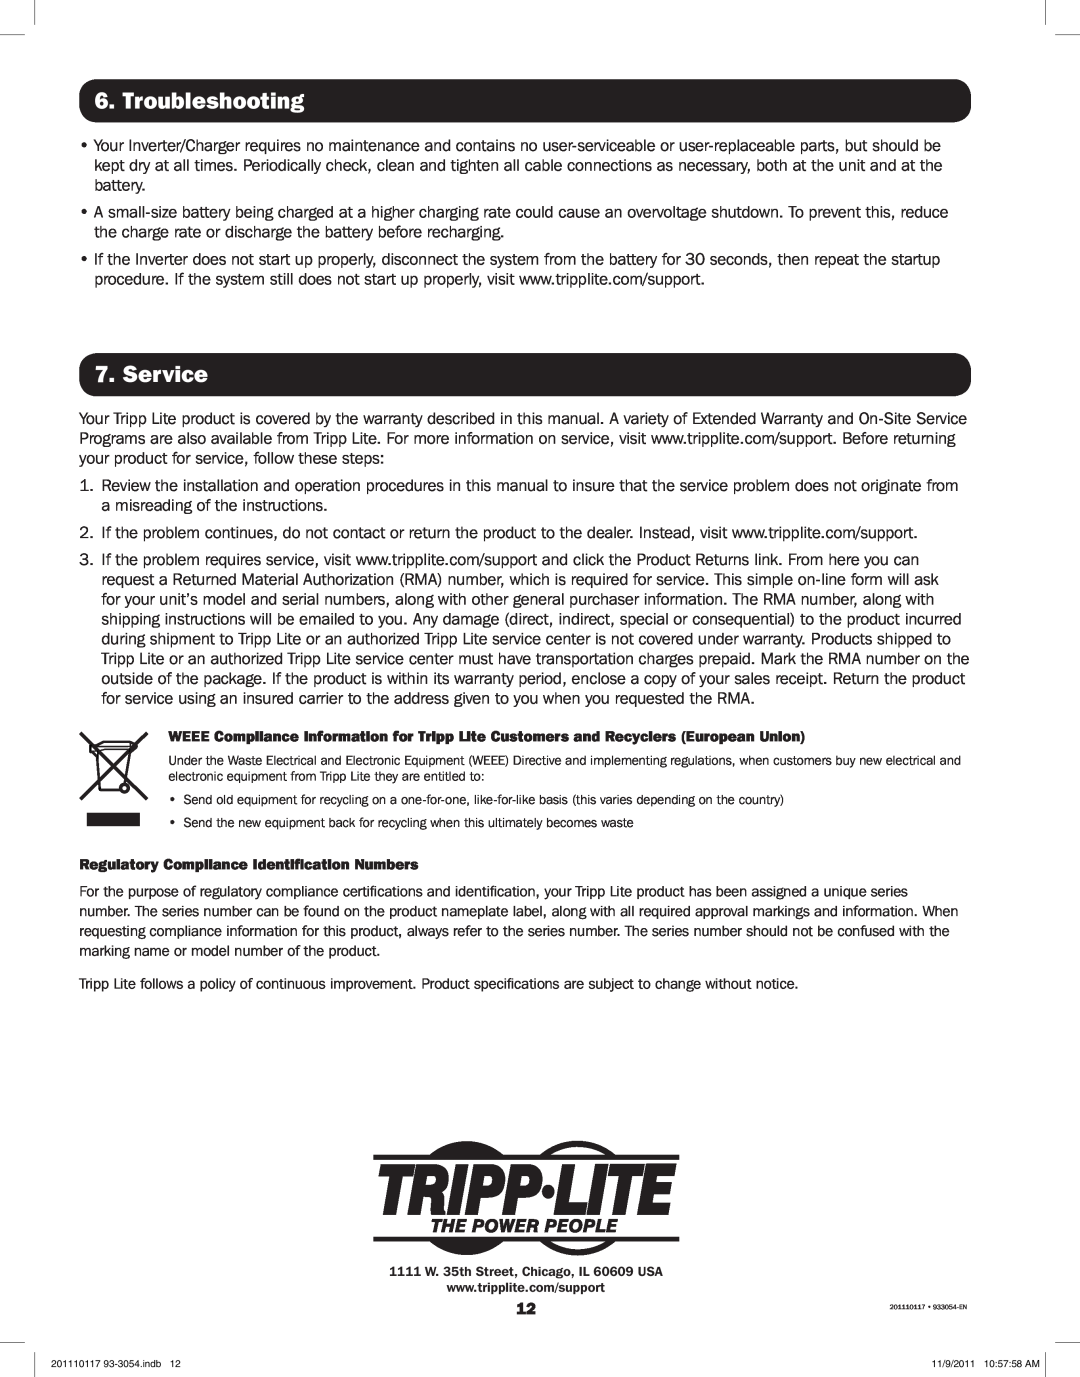 Tripp Lite APSX1012SW, APSX2012SW owner manual Troubleshooting, Service, Regulatory Compliance Identification Numbers 